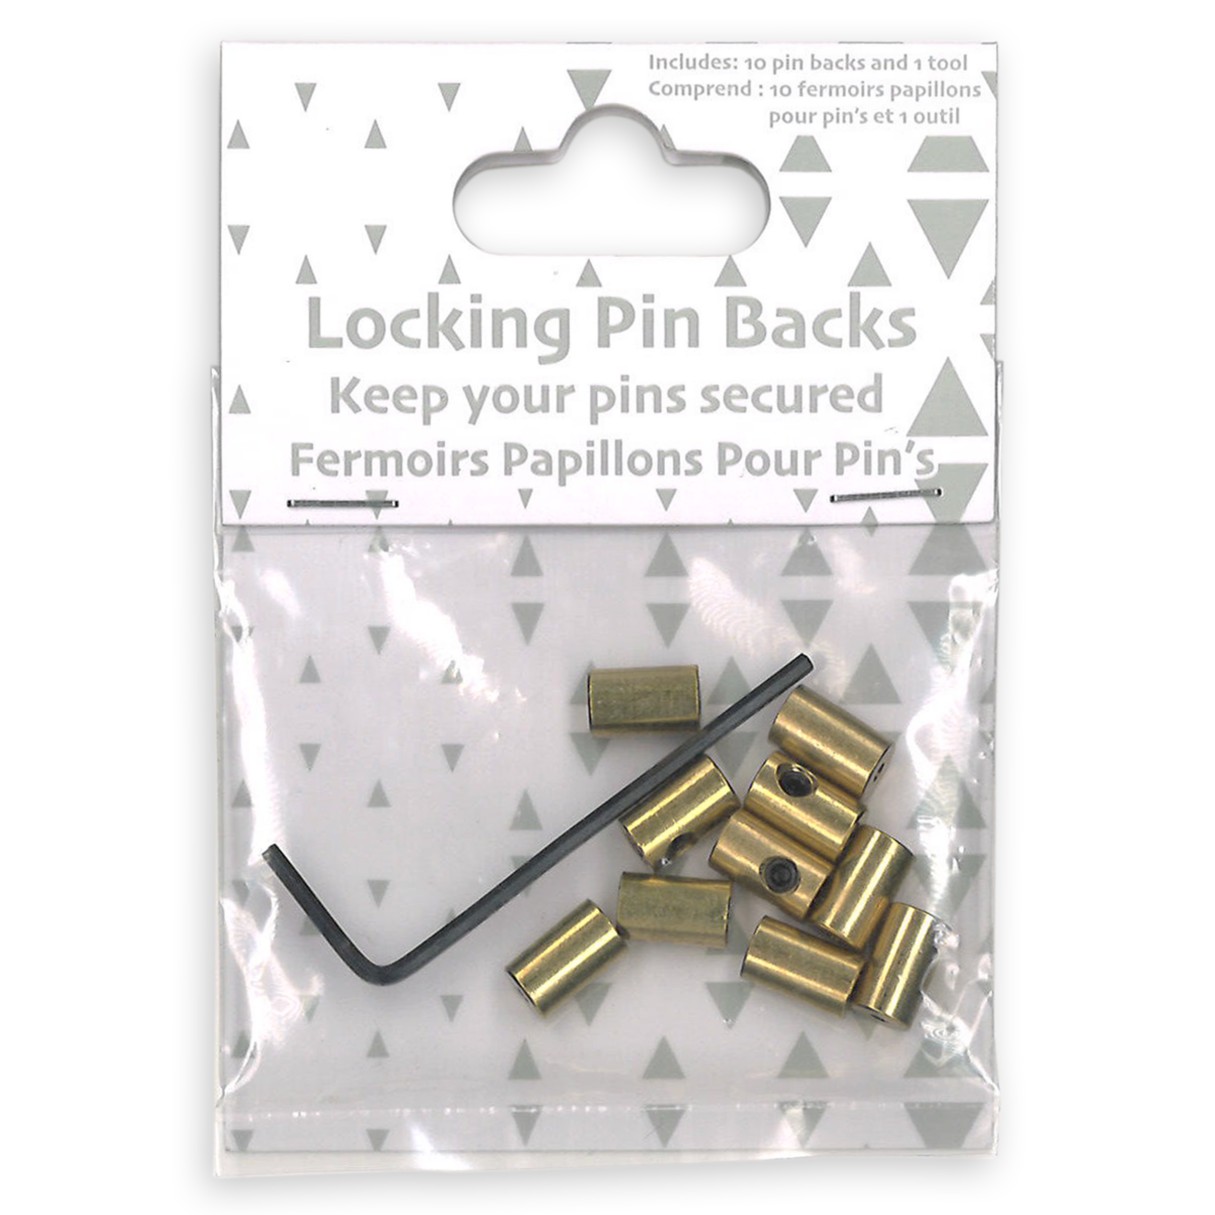 How to Use Locking Pin Backs in the Best Way